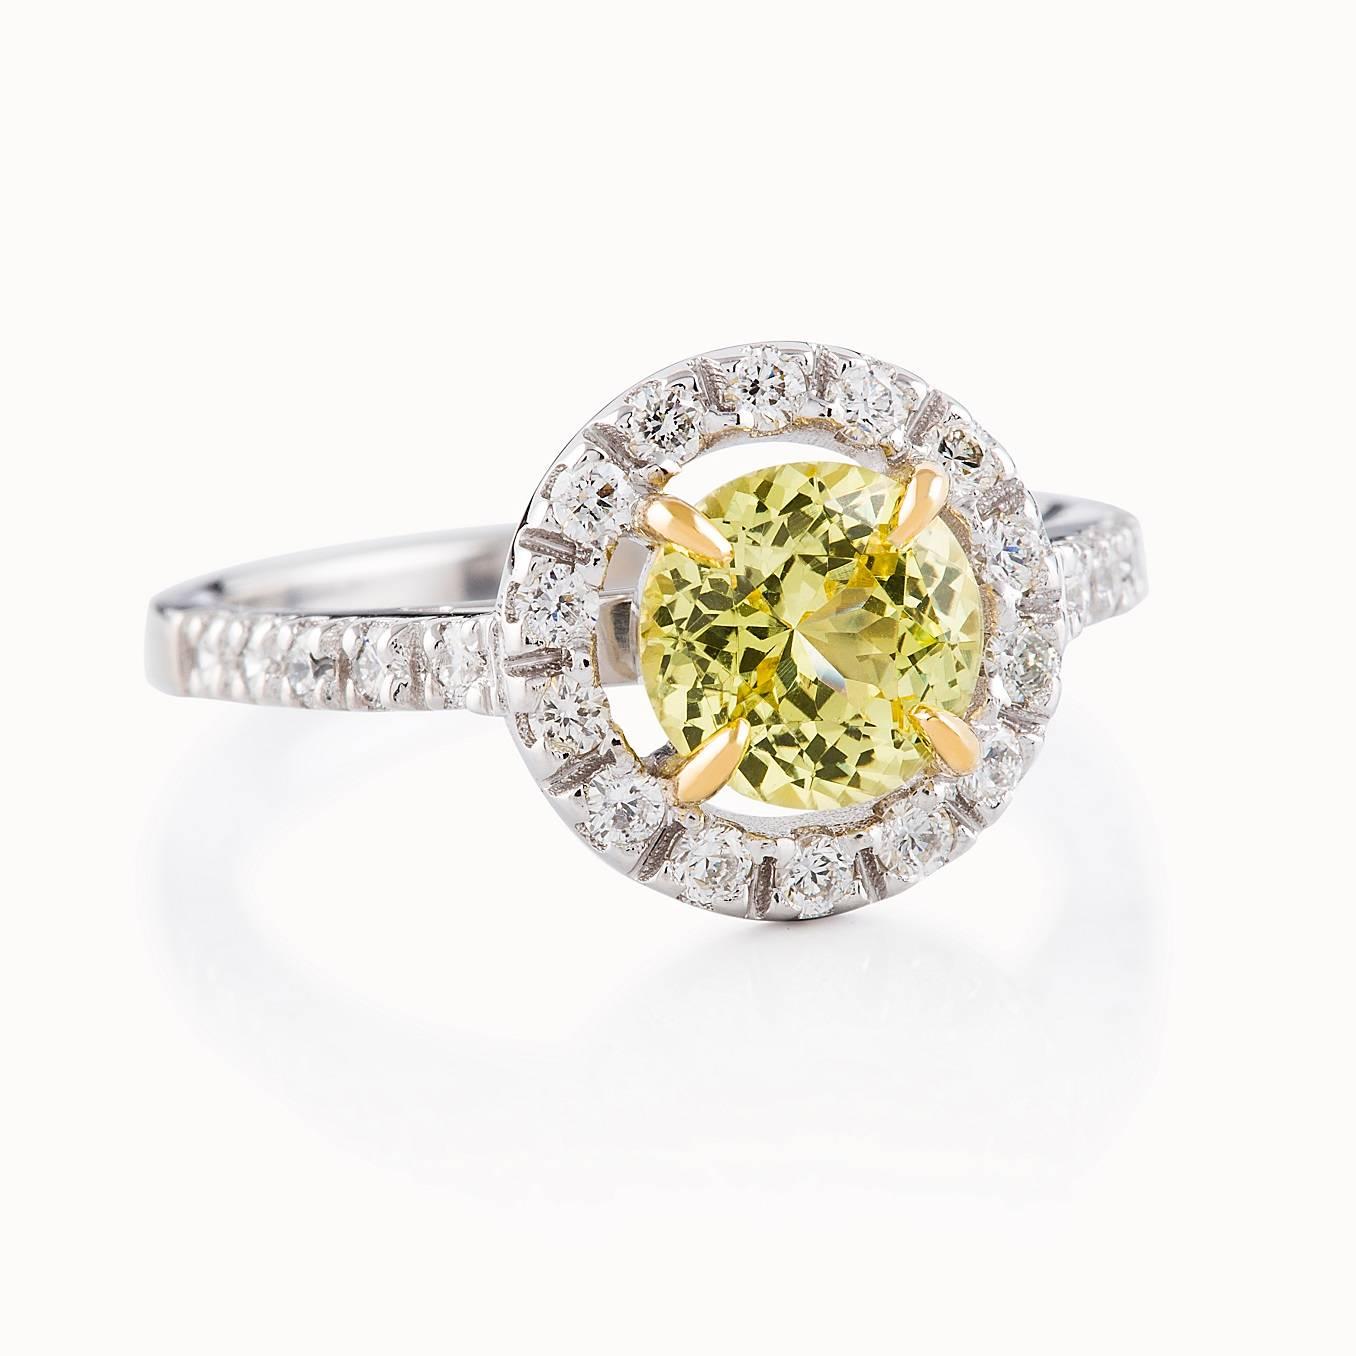 Giallo Halo Ring

This stunning dress ring in 18ct white gold features a beautiful yellow sapphire set in 18ct yellow gold which is complimented with a halo of petite white diamonds and diamonds on either side of the setting.

Round faceted